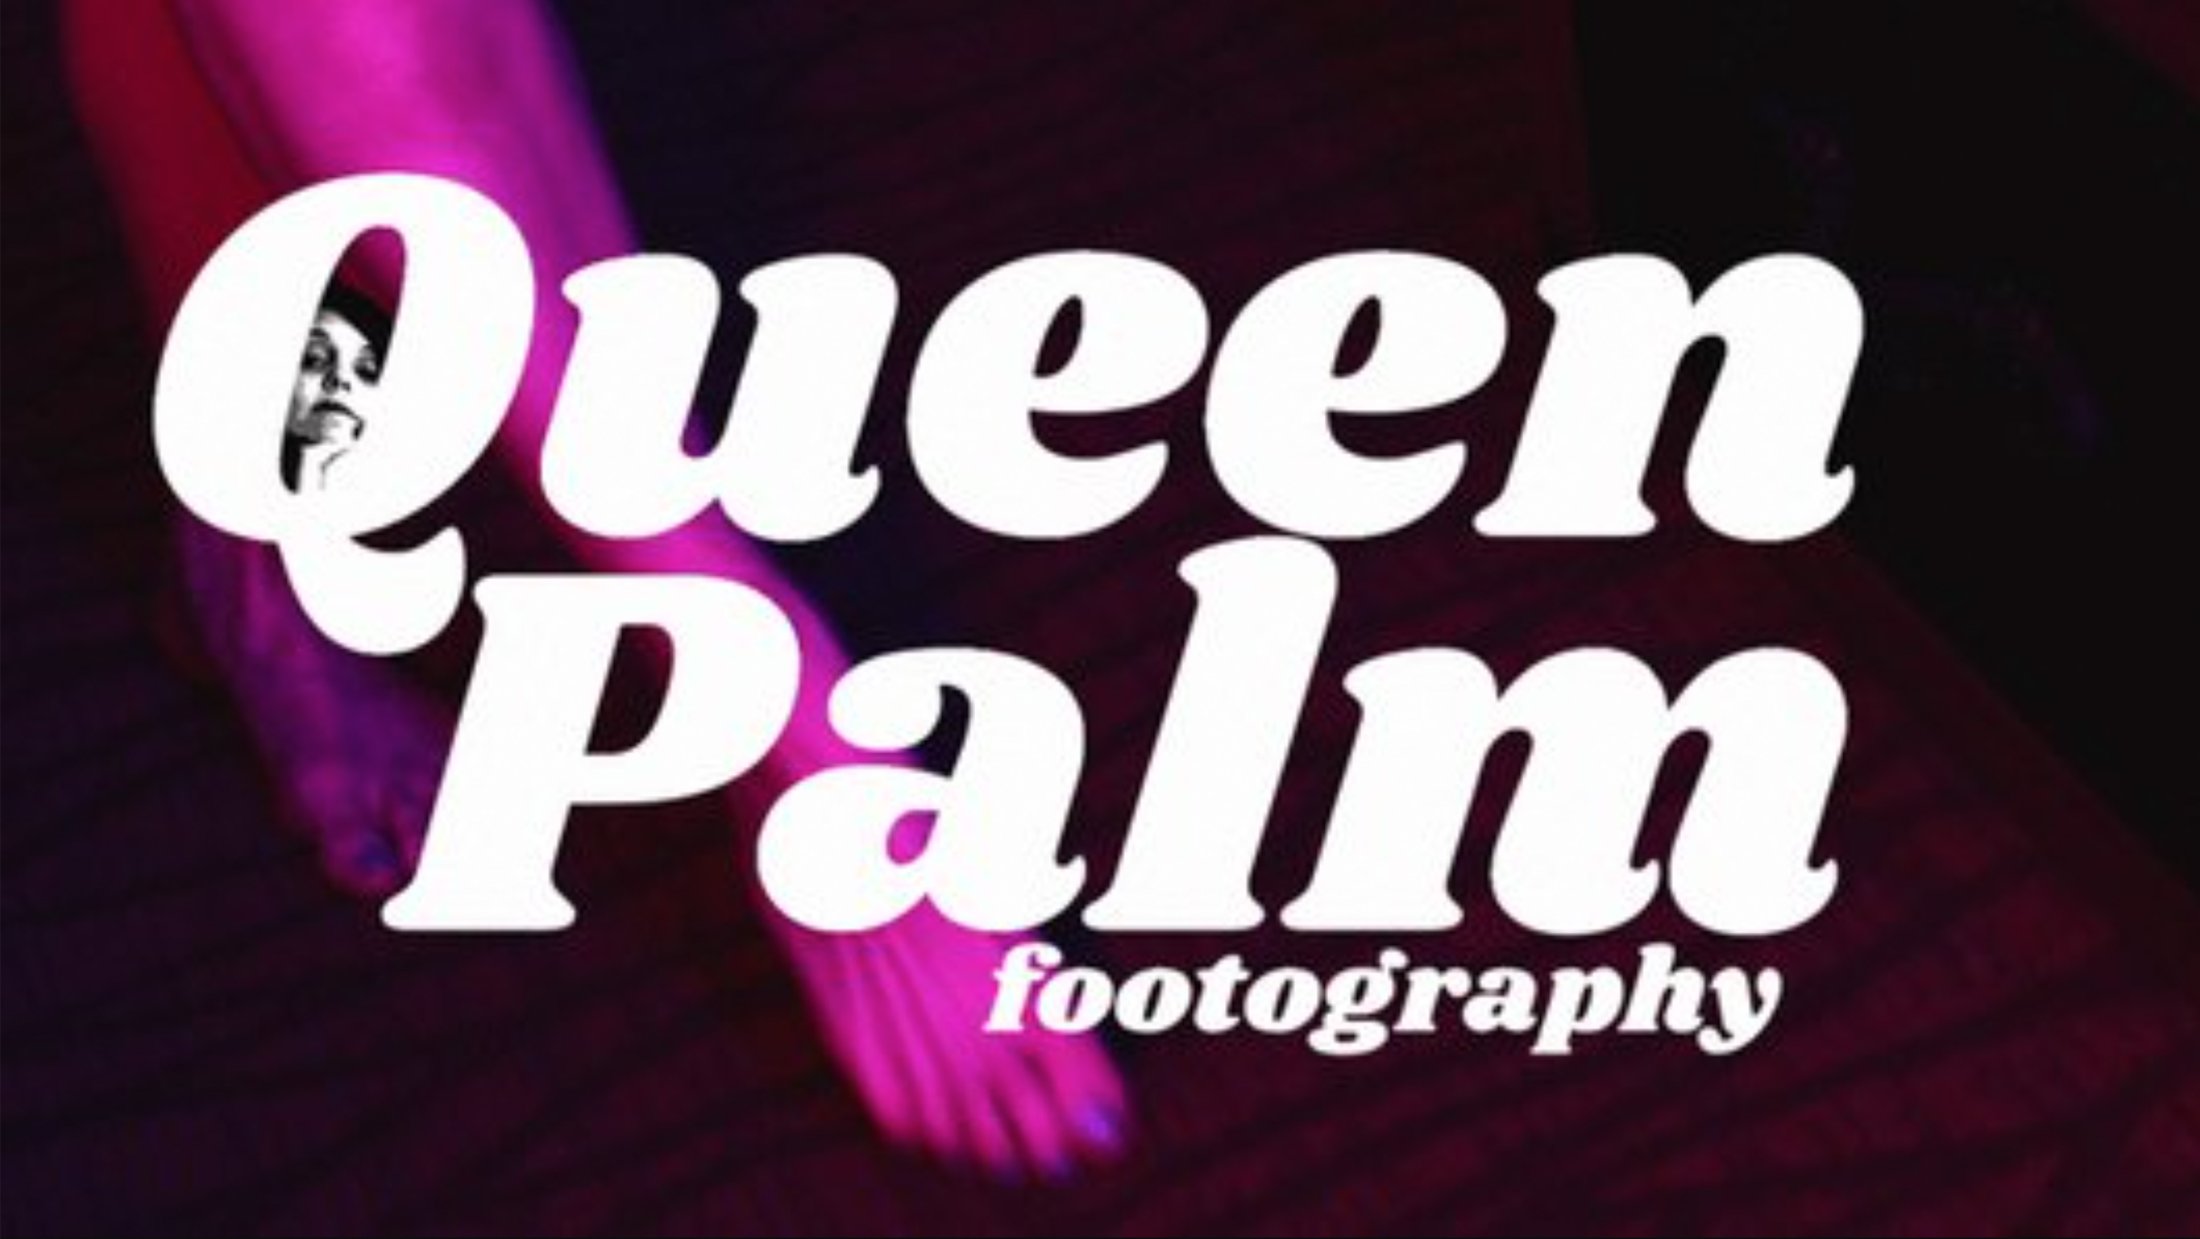 Queen Palm Footography